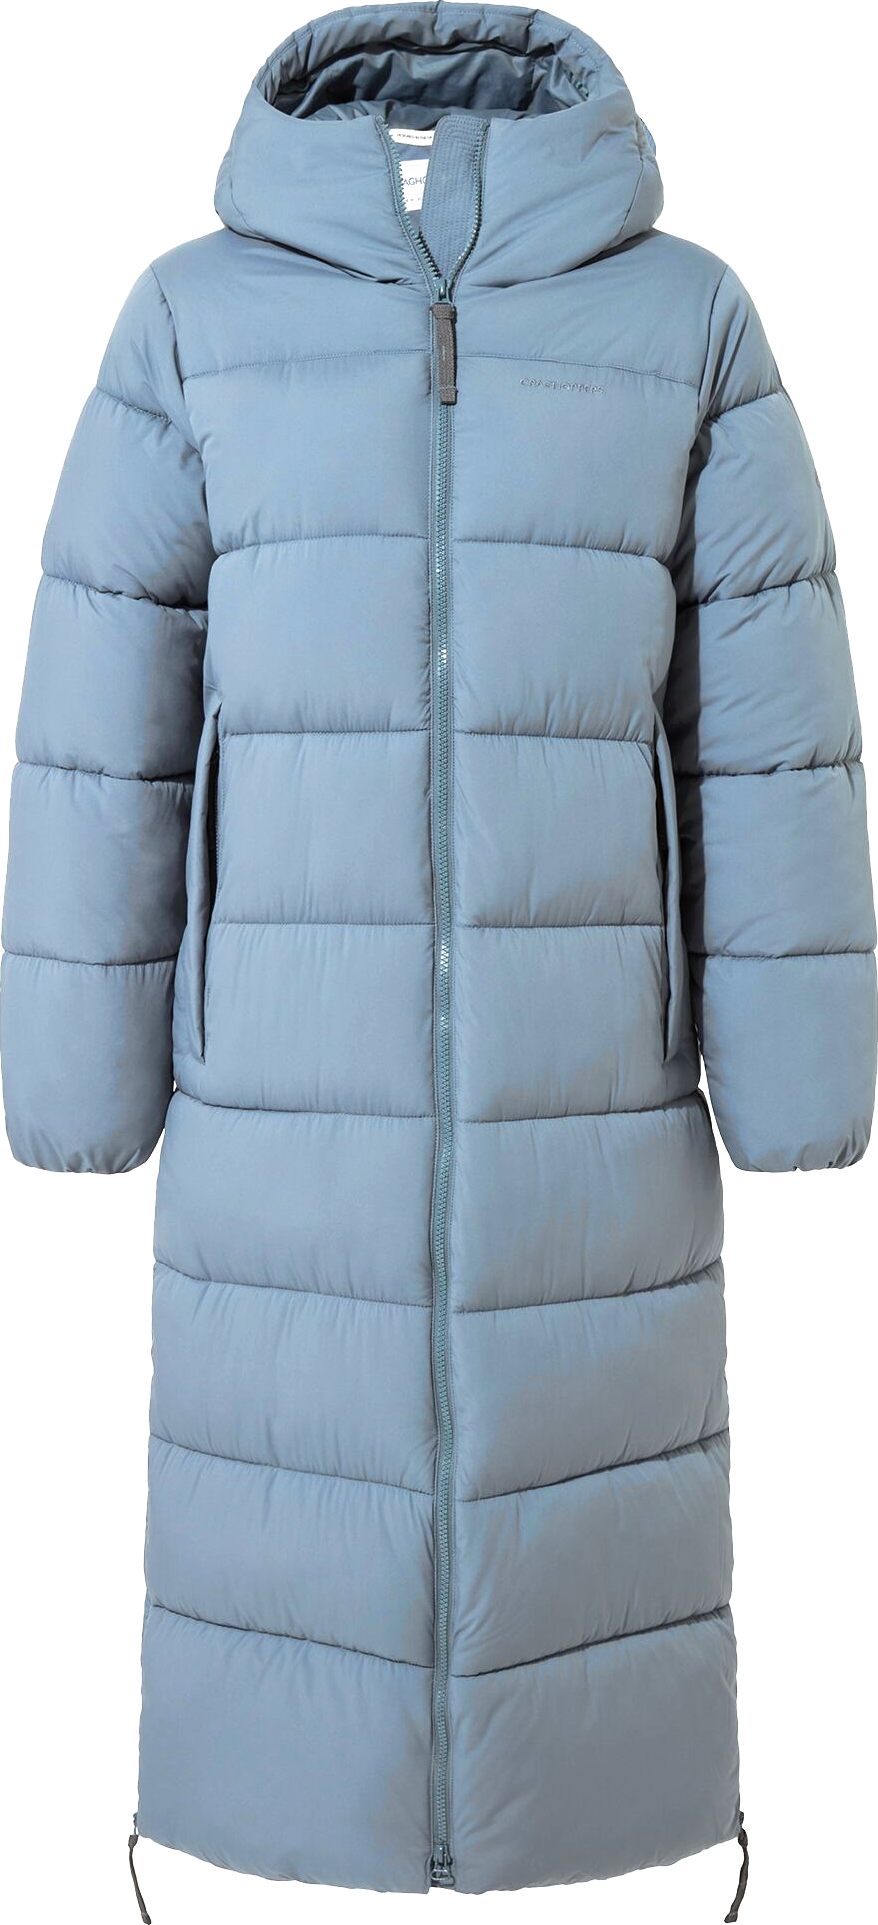 Craghoppers Women's Narlia Insulated Hooded Jacket Winter Sky